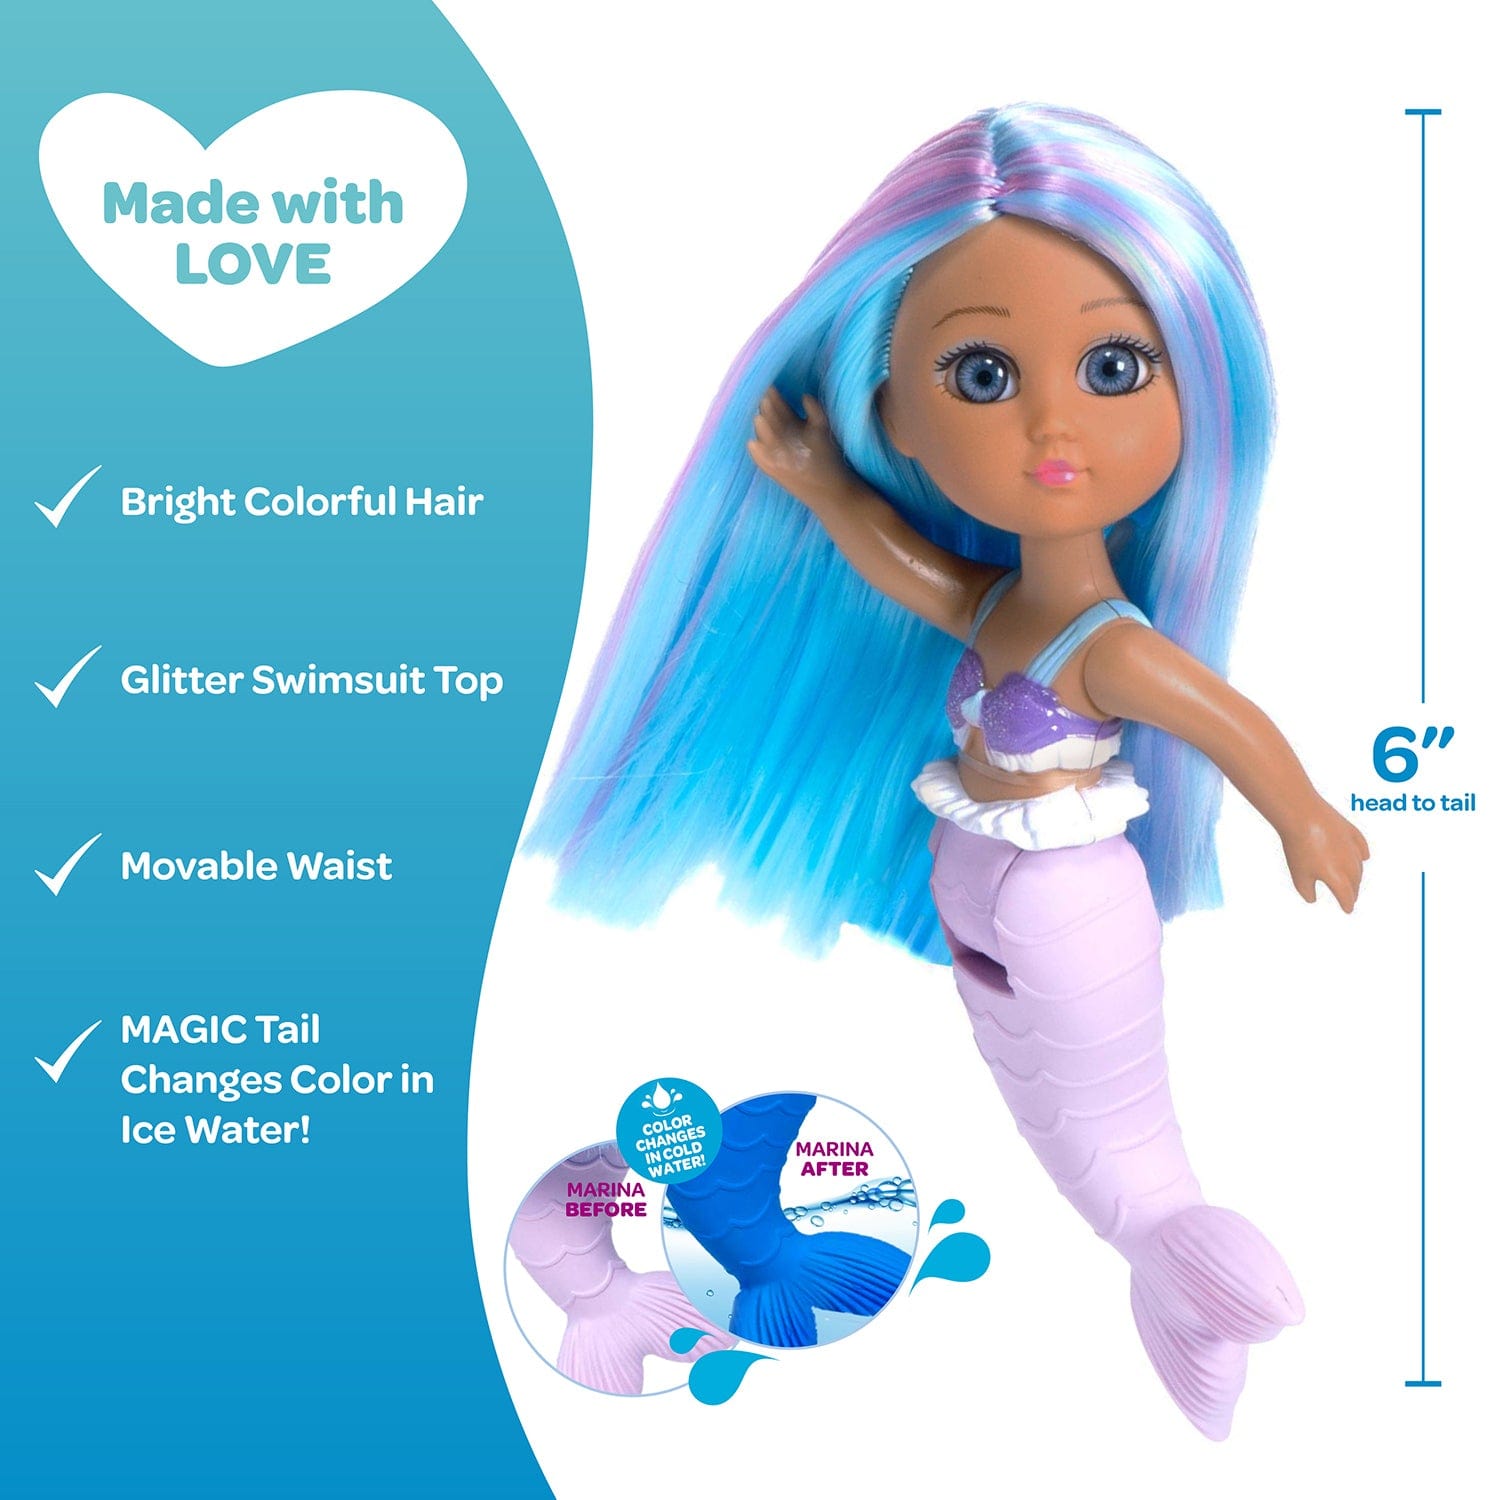 Water Wonder Marina mermaid doll has brightly colored blue hair with purple highlights, a glittery purple bikini top, and white ruffle accents. Her beautiful mermaid doll tail changes from lilac purple to blue when she’s swimming in cold water. Ages 1+.